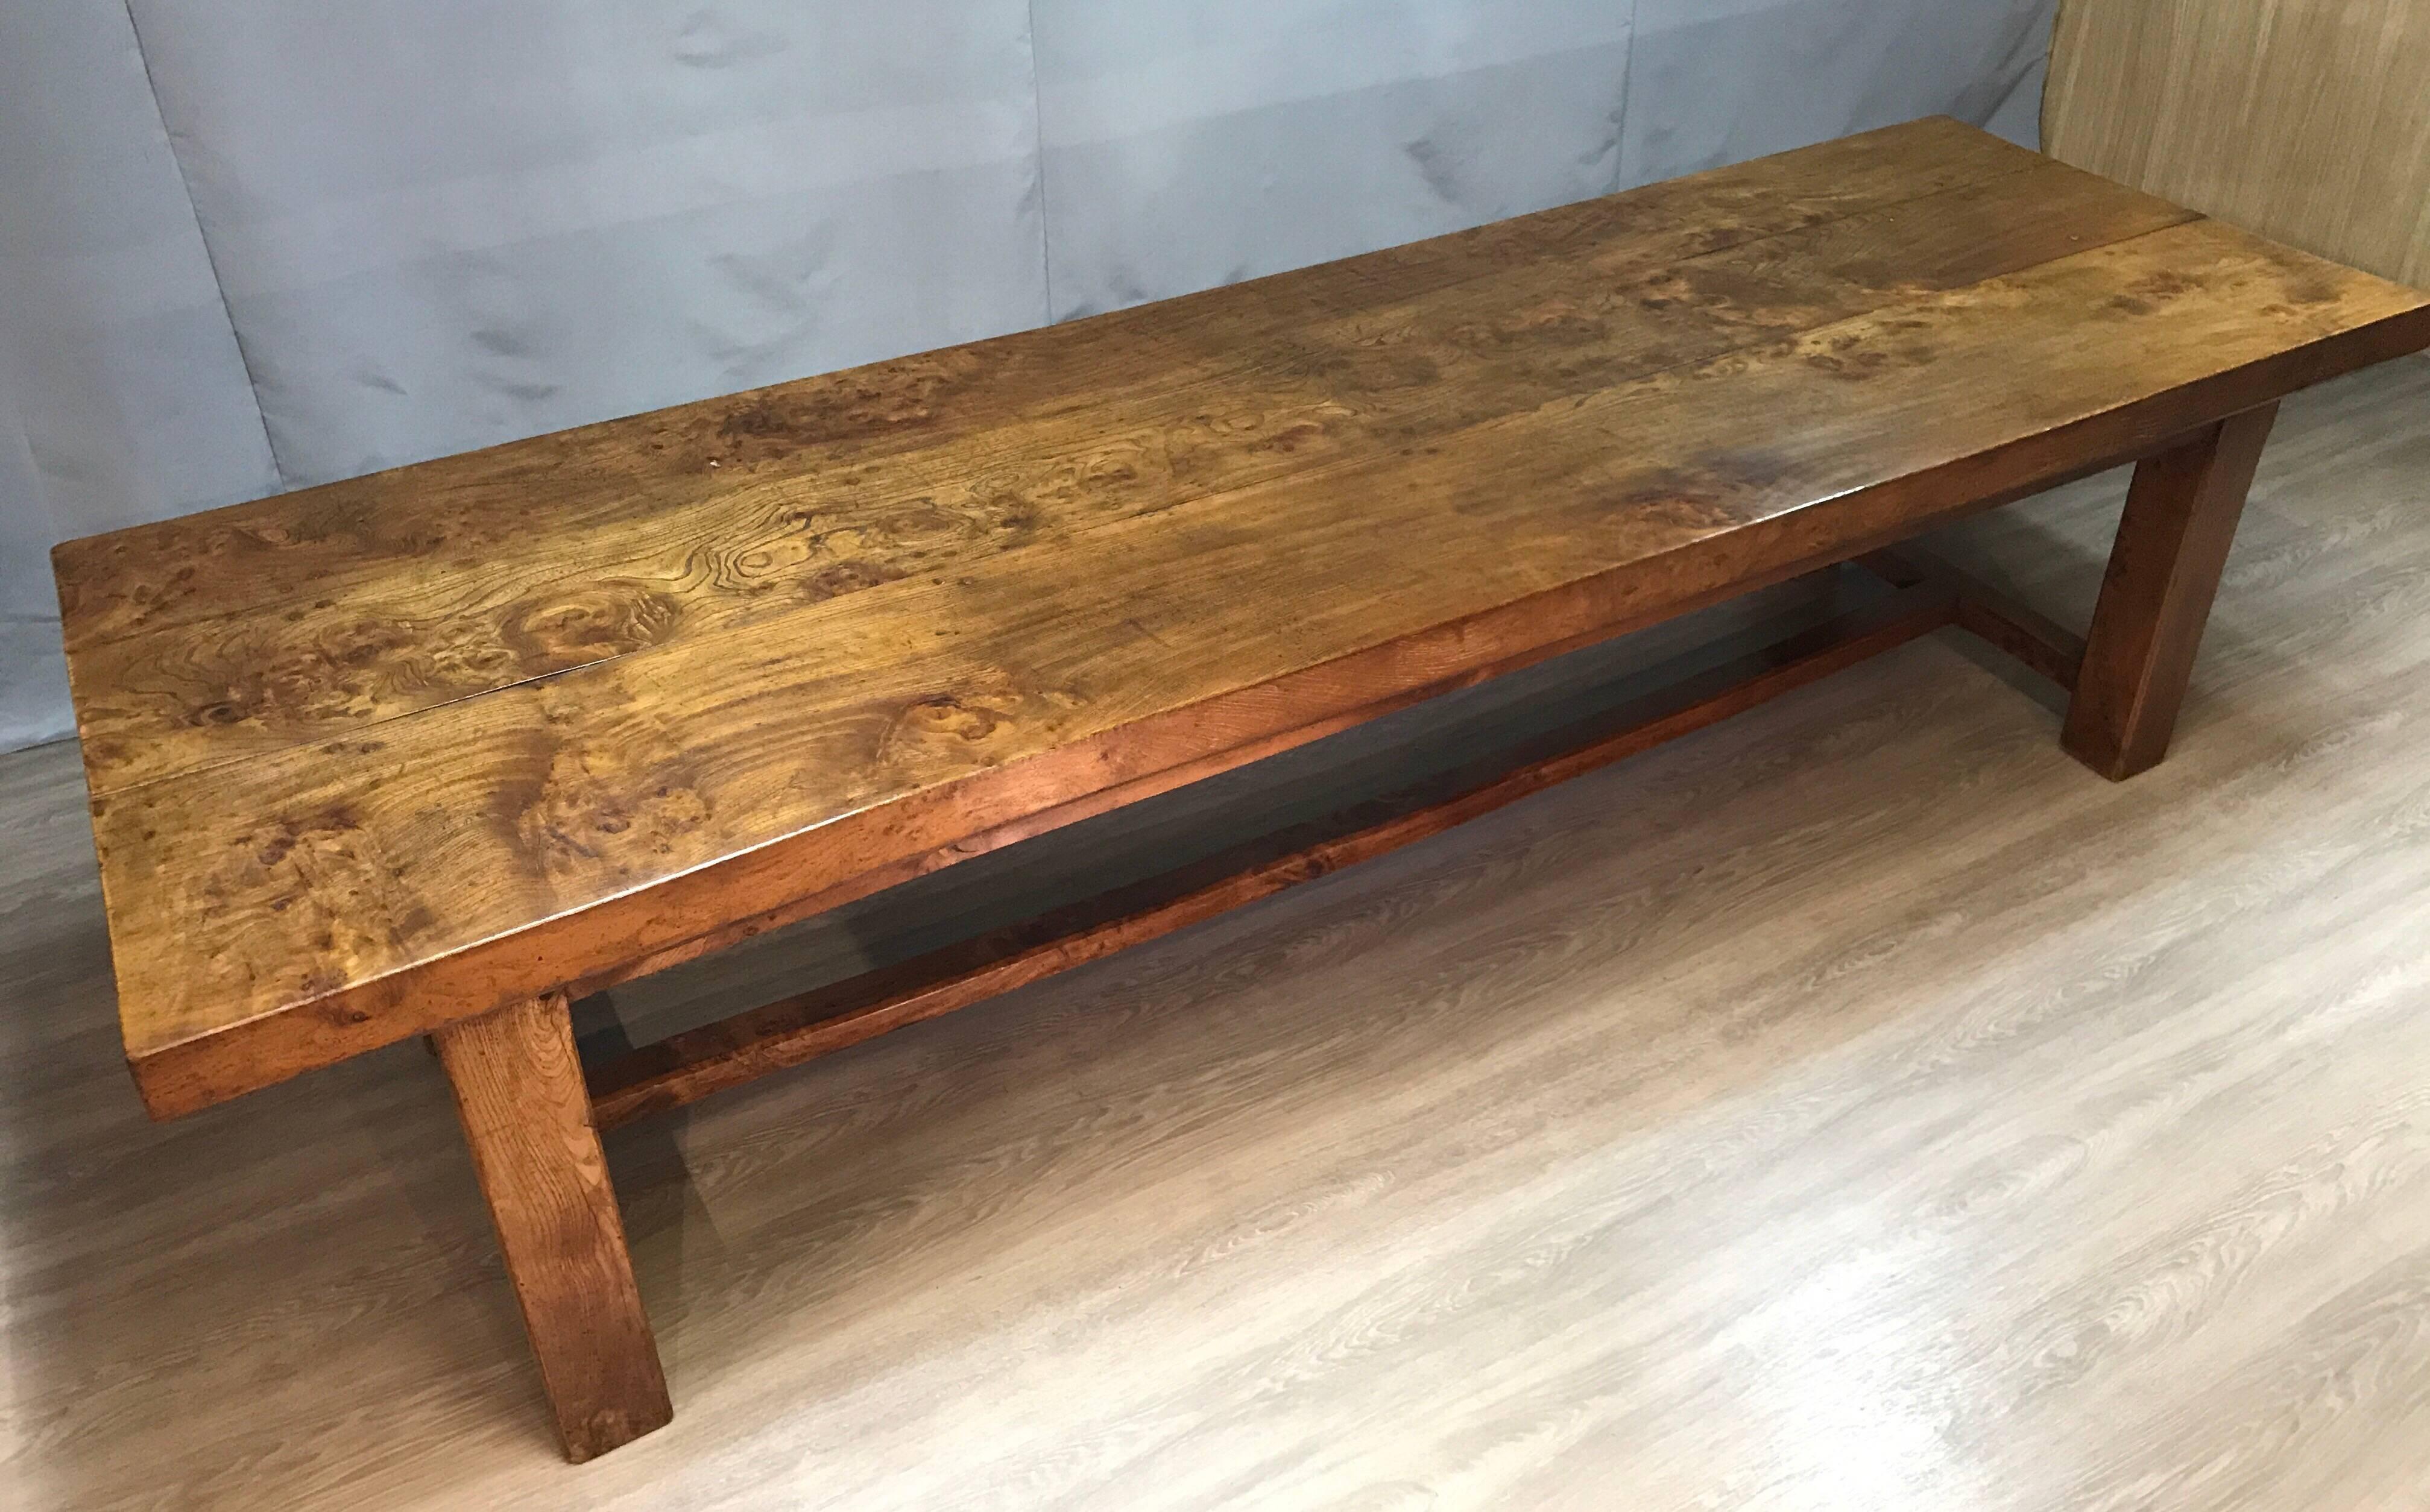 This exceptional late 19th century large elm farmhouse table, has wonderful proportions and stunning color. The beautiful figured 8.5cm thick top sits on four chunky legs, the legs are supported by a centre stretcher. The table was made in Normandy